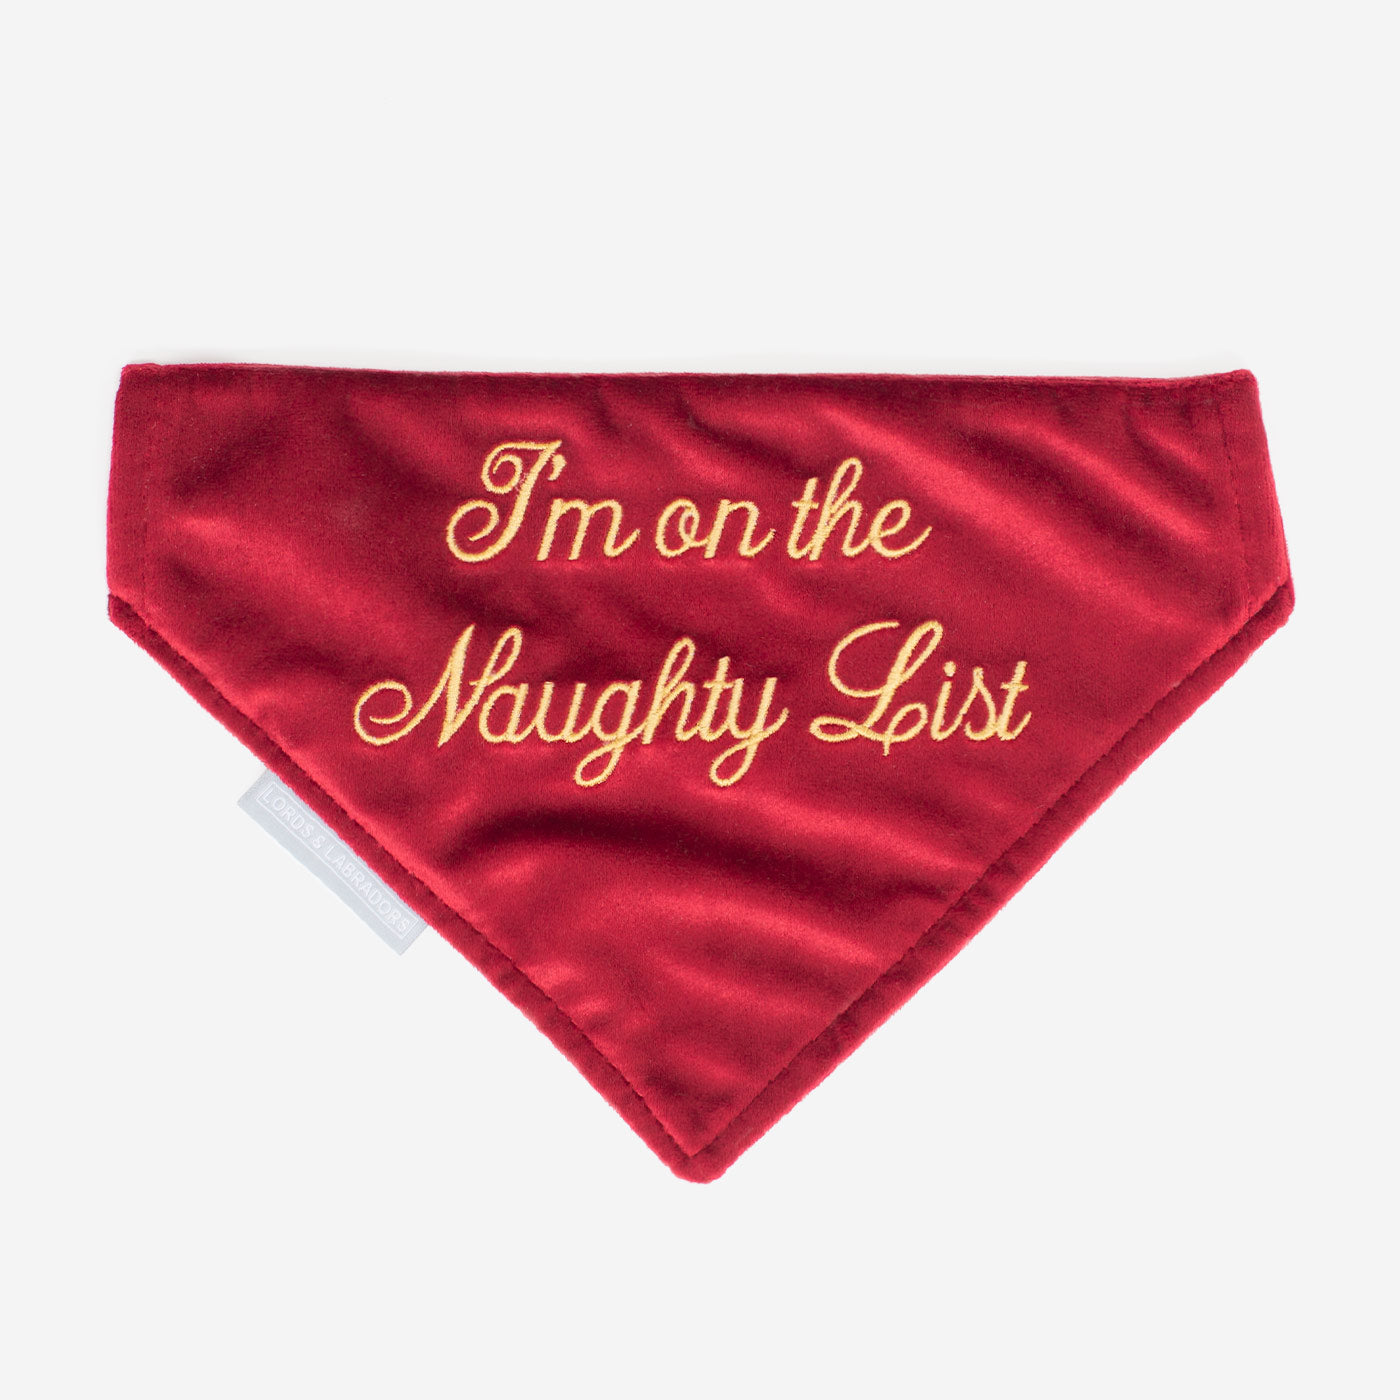 Discover The Perfect Bandana For Dogs, ' I'm on the Naughty List ' Dog Bandana In Luxury Cranberry Velvet, Available To Now at Lords & Labradors    